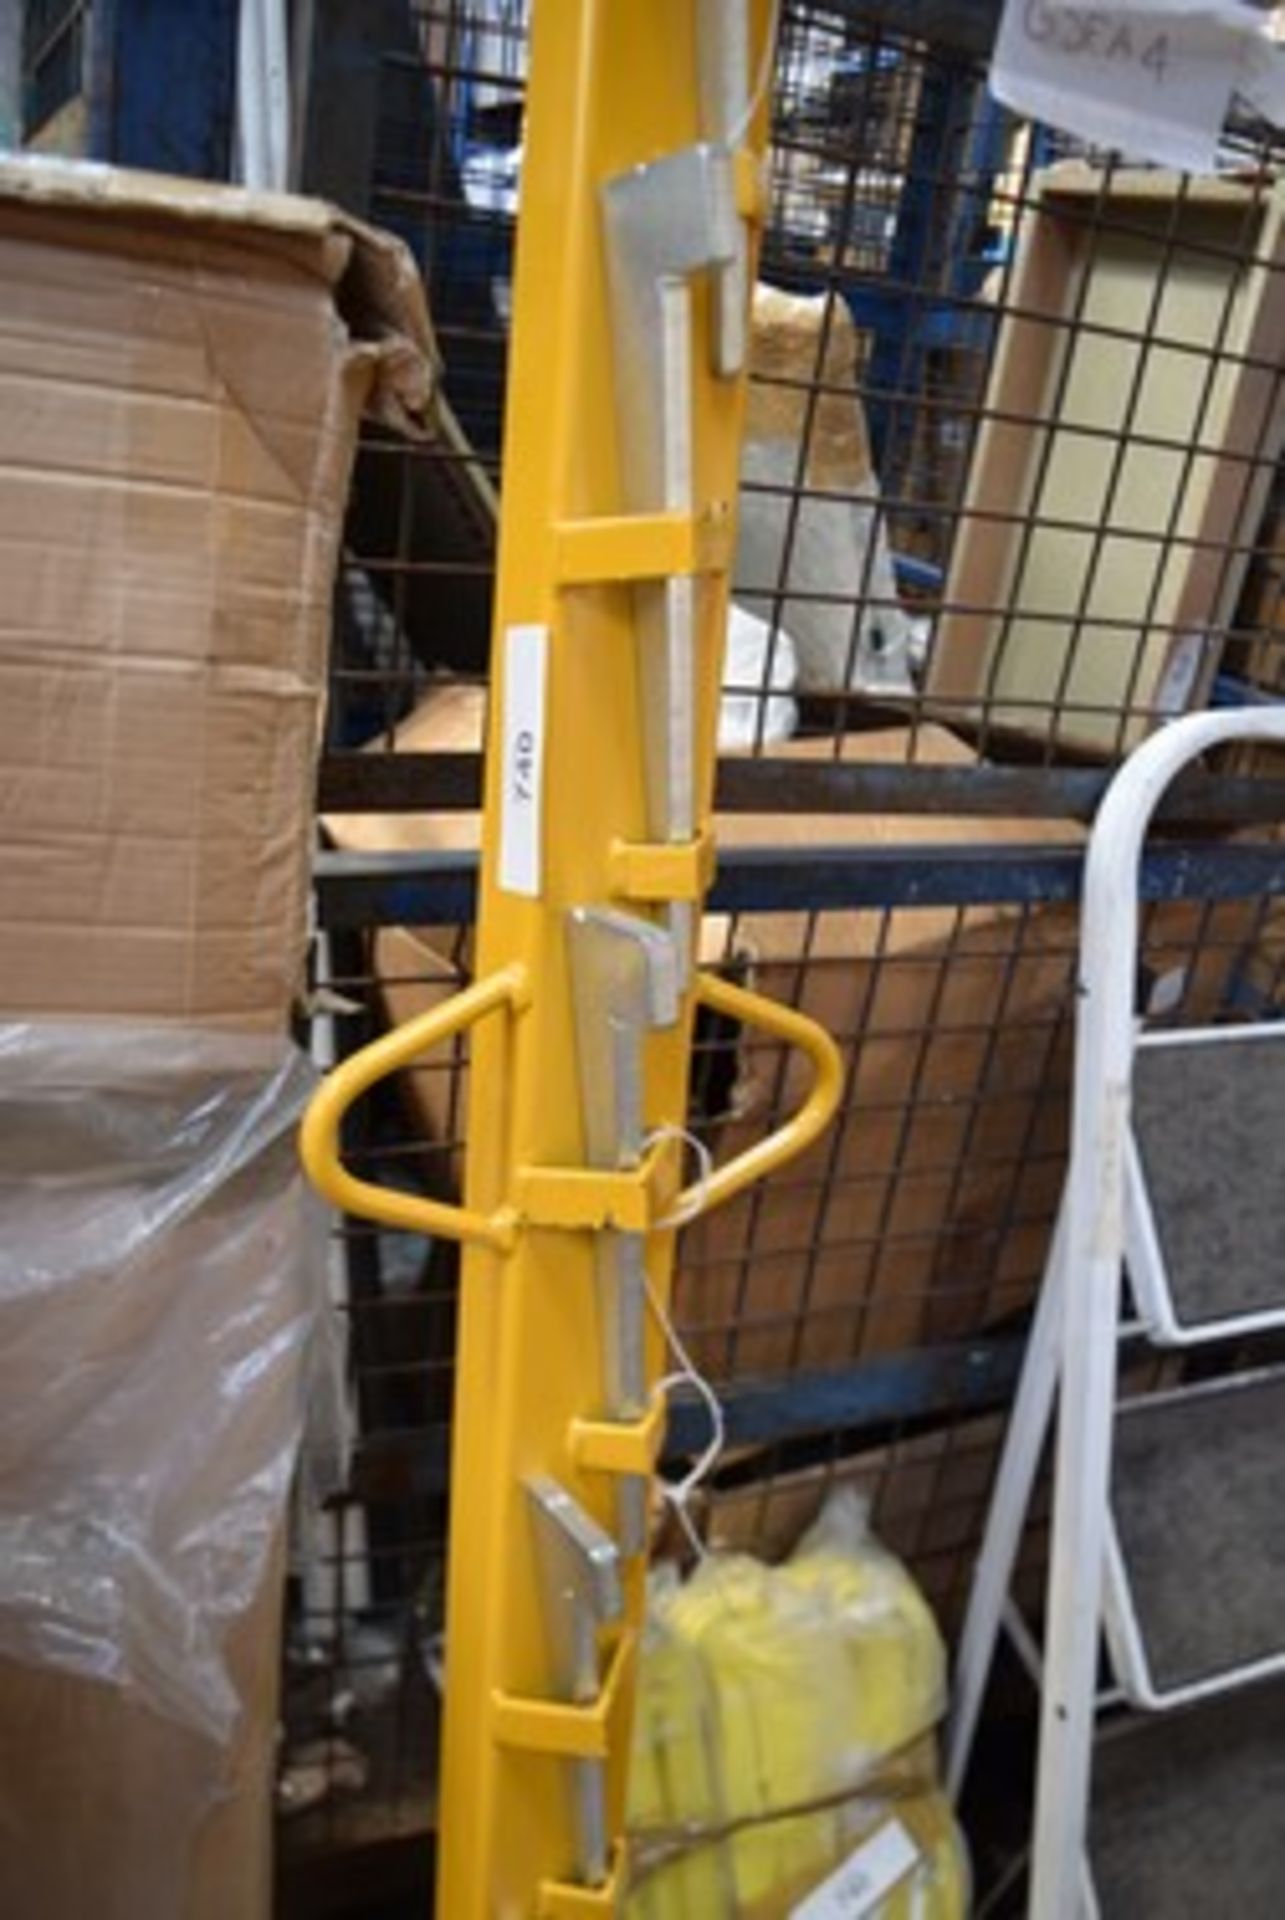 1 x lifting bar with wedge system, note no load capacity signage and 3 x yellow slings, 5m x 3 tonne - Image 3 of 4